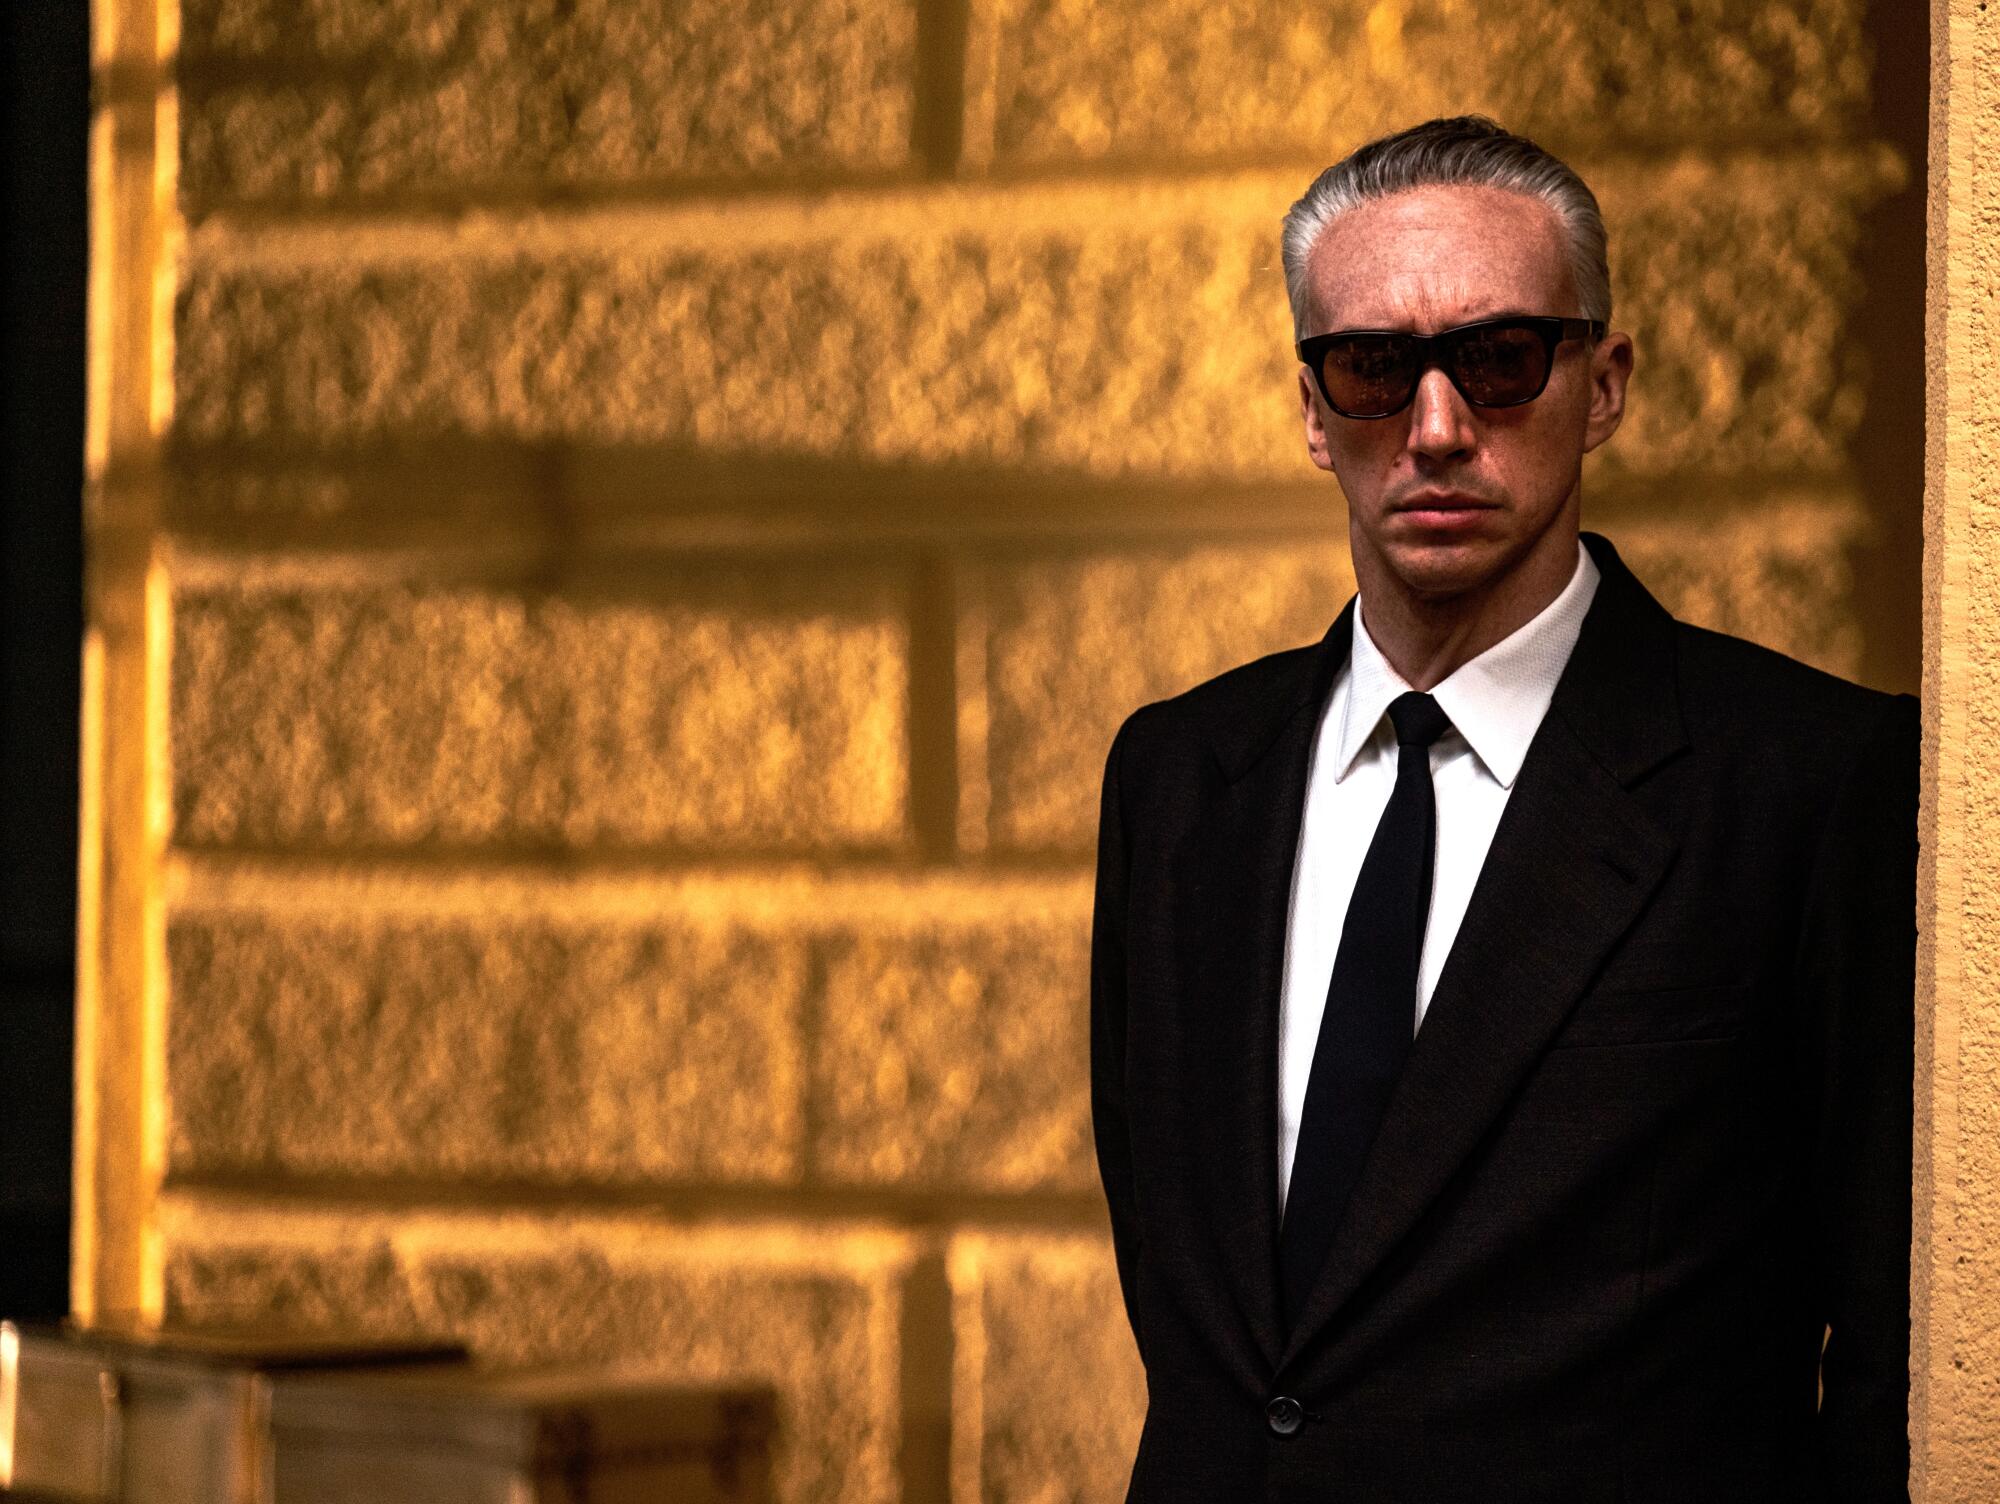 A man in shades and a dark suit stands observing.